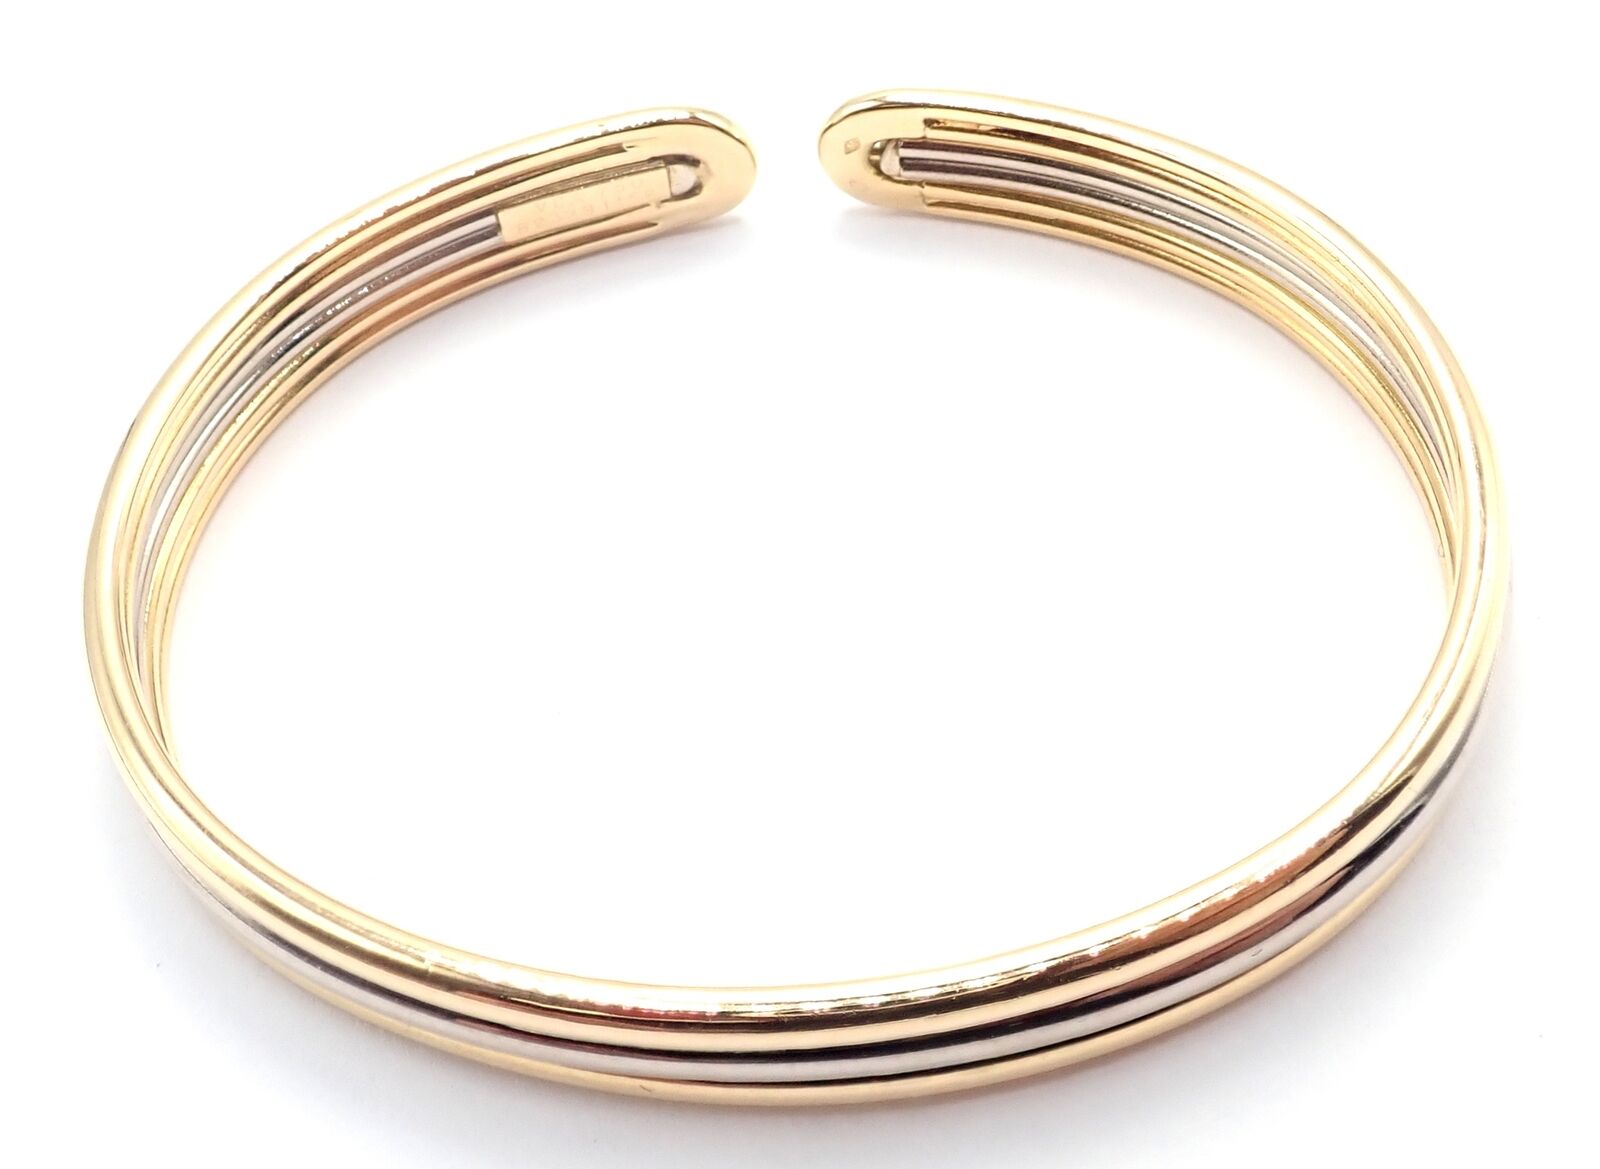 Van Cleef & Arpels Jewelry & Watches:Fine Jewelry:Bracelets & Charms Authentic! Van Cleef & Arpels 18k Yellow & White Gold Bangle Cuff Bracelet Paper